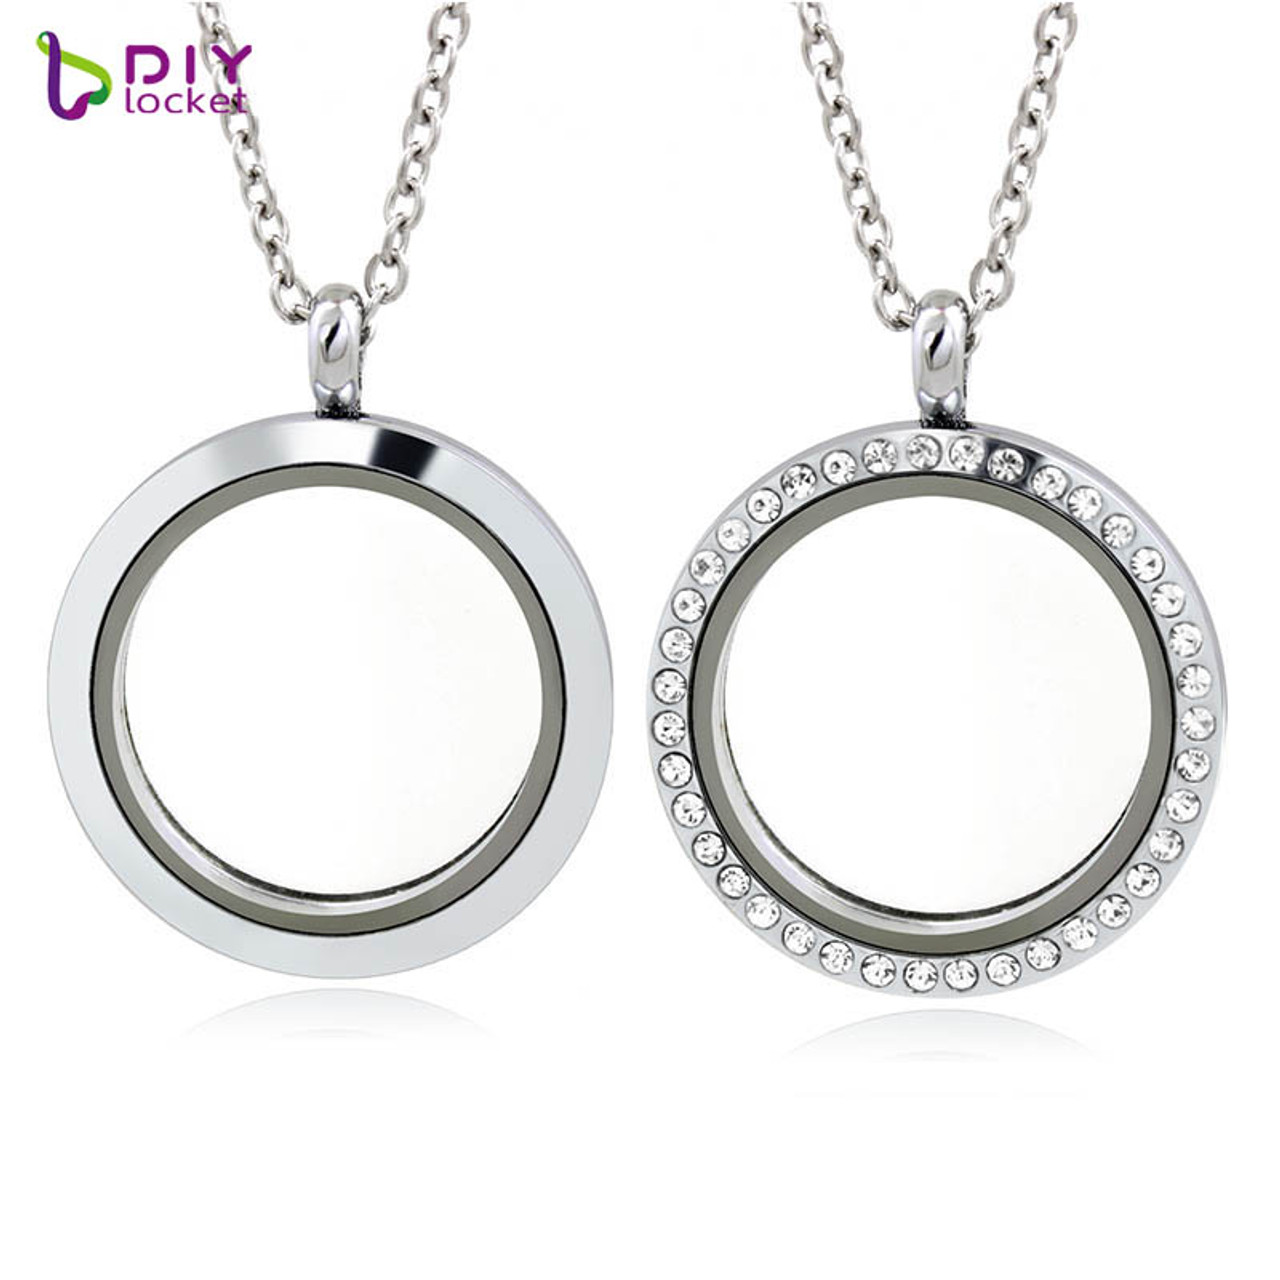 30mm Round Magnetic Floating Charms Locket LSFL01